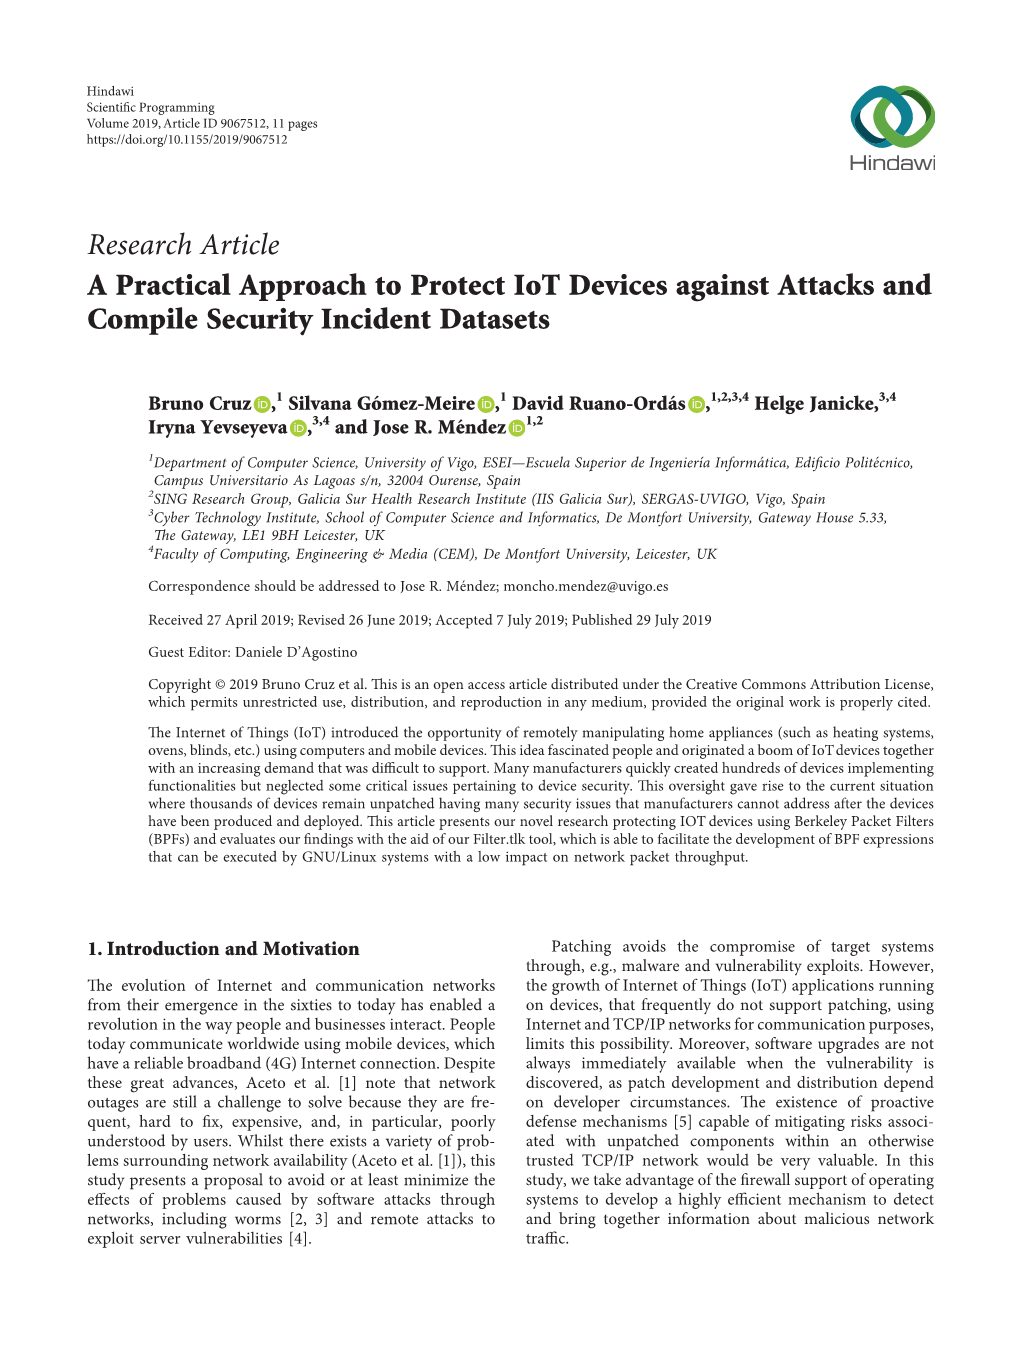 A Practical Approach to Protect Iot Devices Against Attacks and Compile Security Incident Datasets